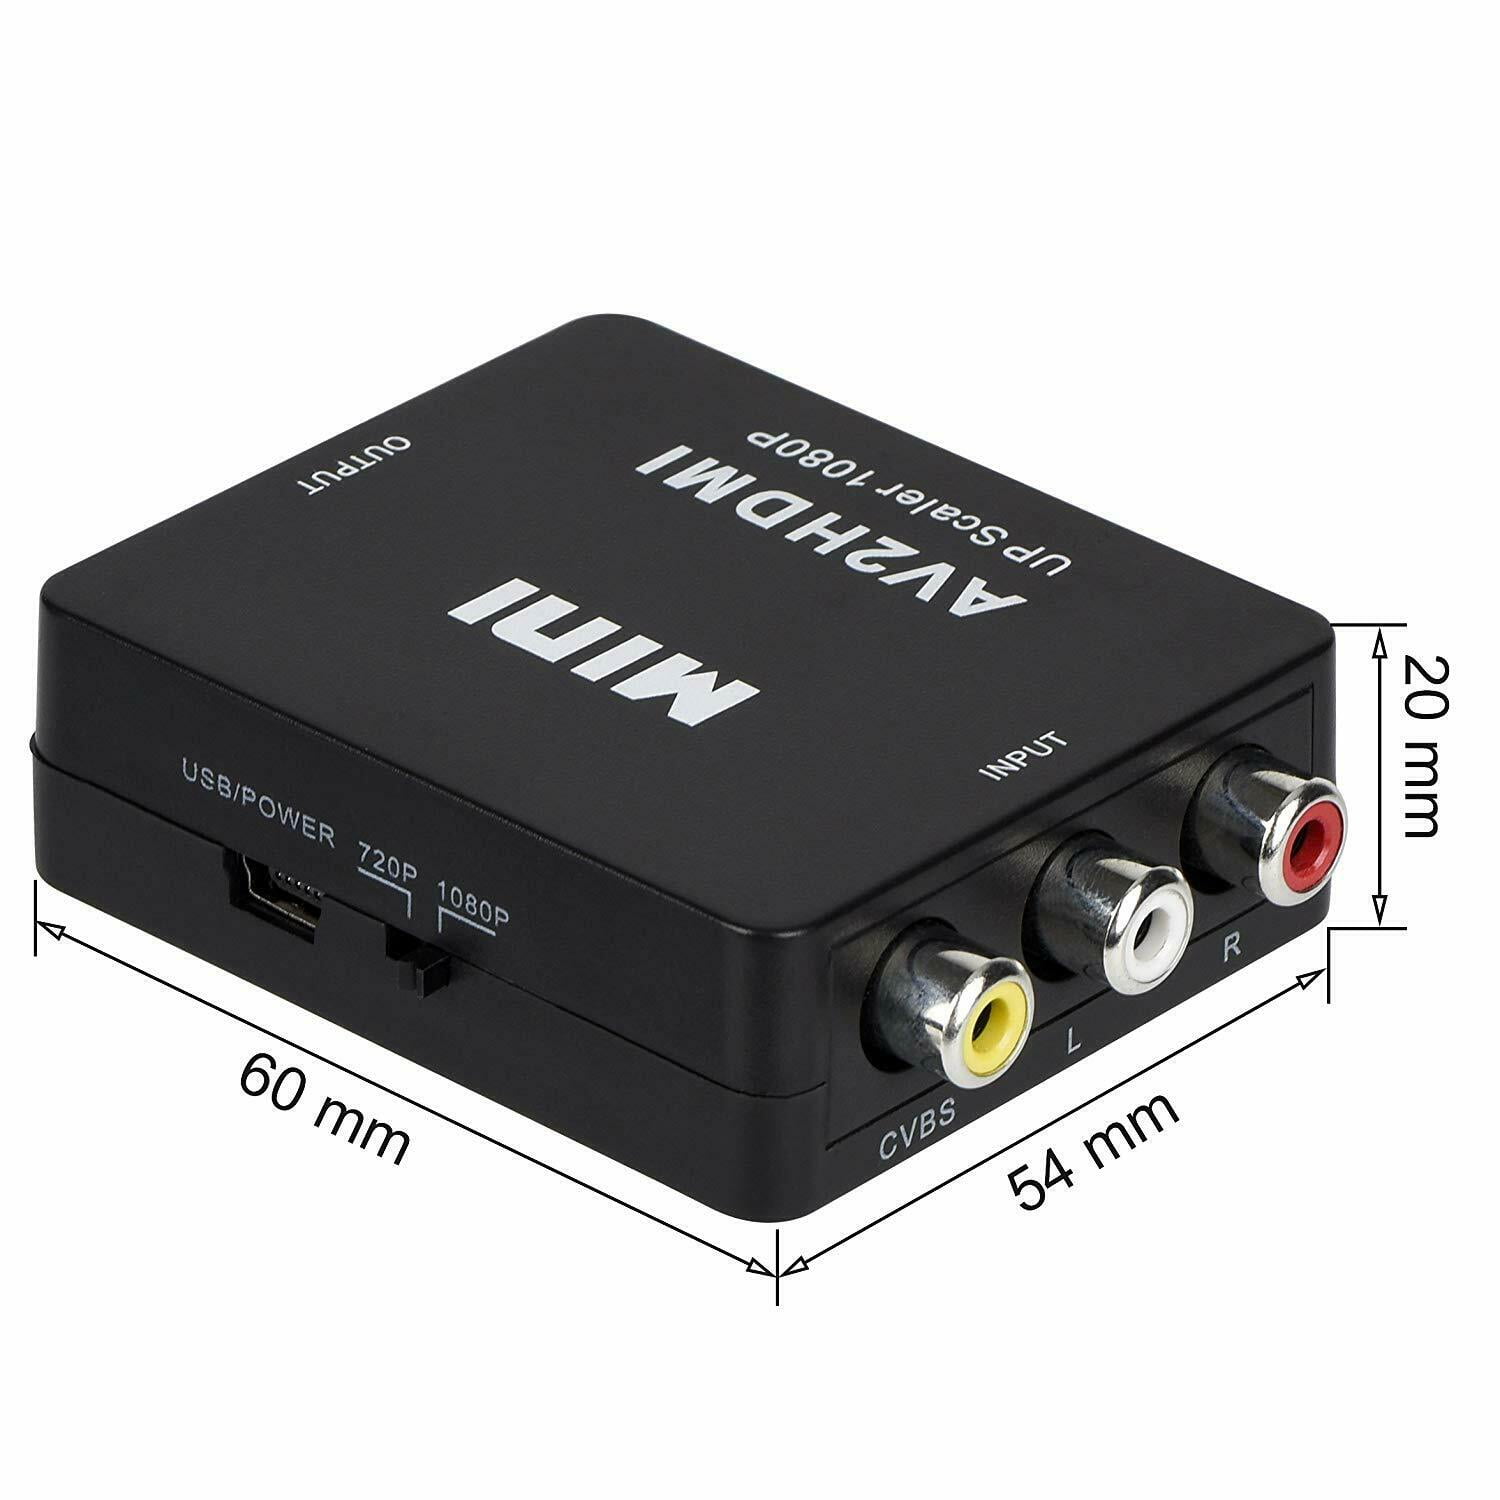 RCA to HDMI converter 1080P Mini RCA Composite CVBS AV to HDMI Video Audio Converter Adapter Supporting PAL/NTSC with USB Charge Cable PC Laptop Xbox PS4 PS3 TV STB VHS VCR